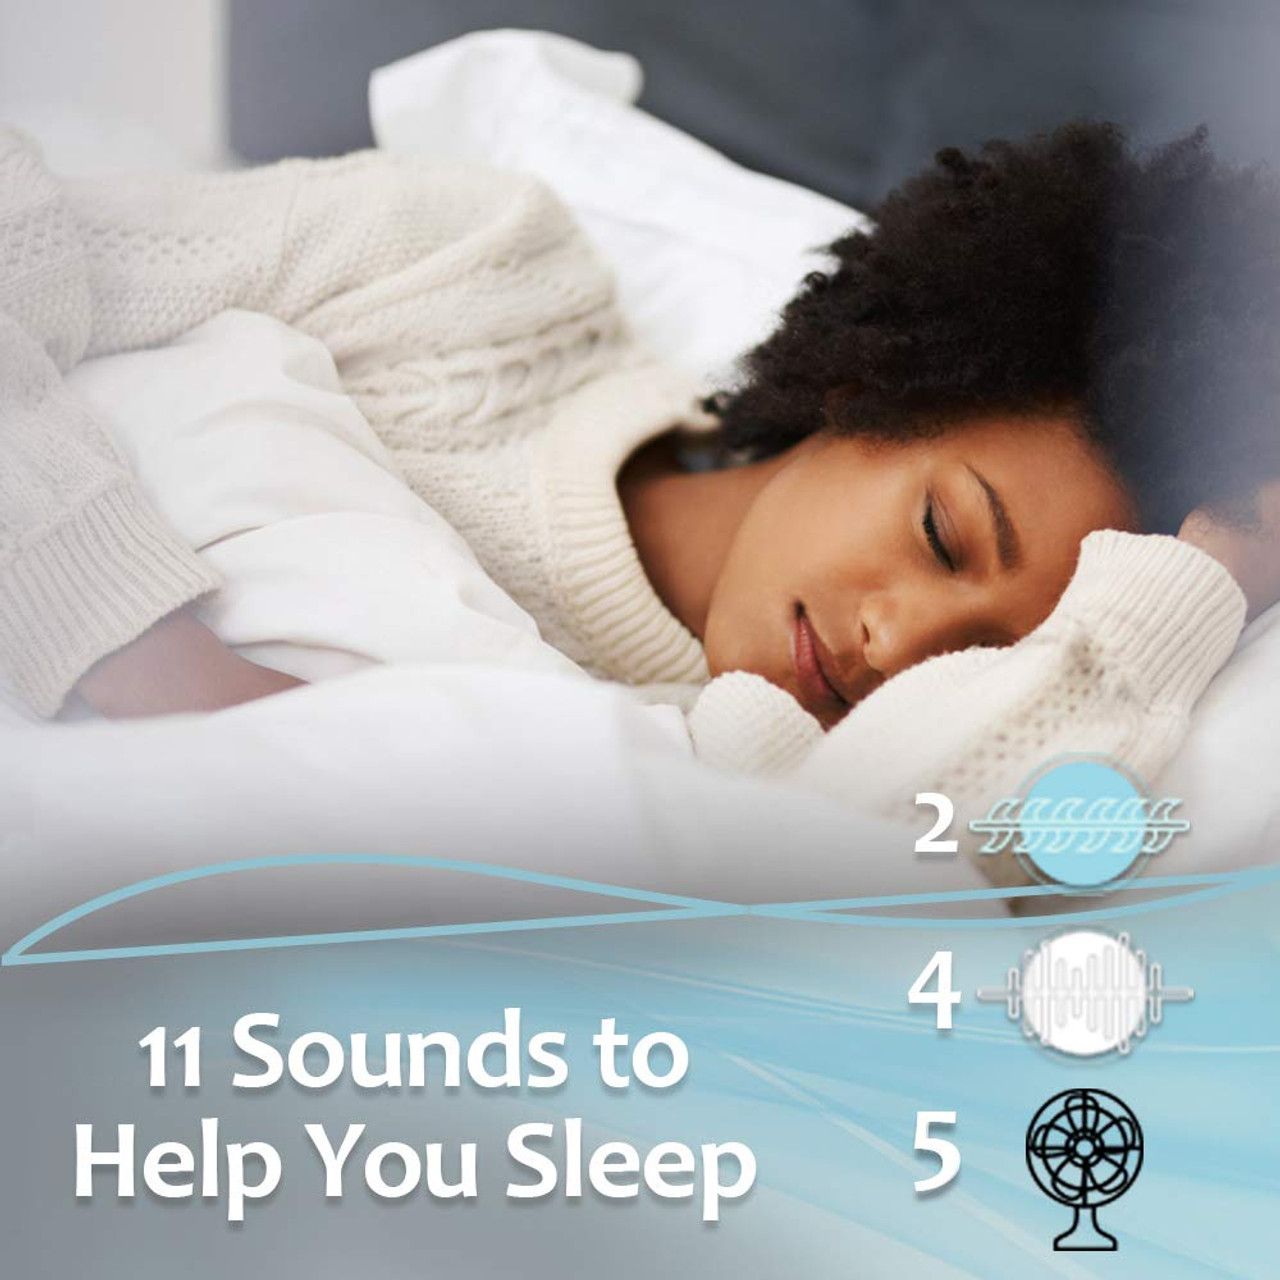 Lectrofan ASM1021-W-RB Micro2 Sleep Sound Machine & Bluetooth Speaker with Fan Sounds  White Noise  & Ocean Sounds for Sleep & Sound Masking  White - Certified Refurbished